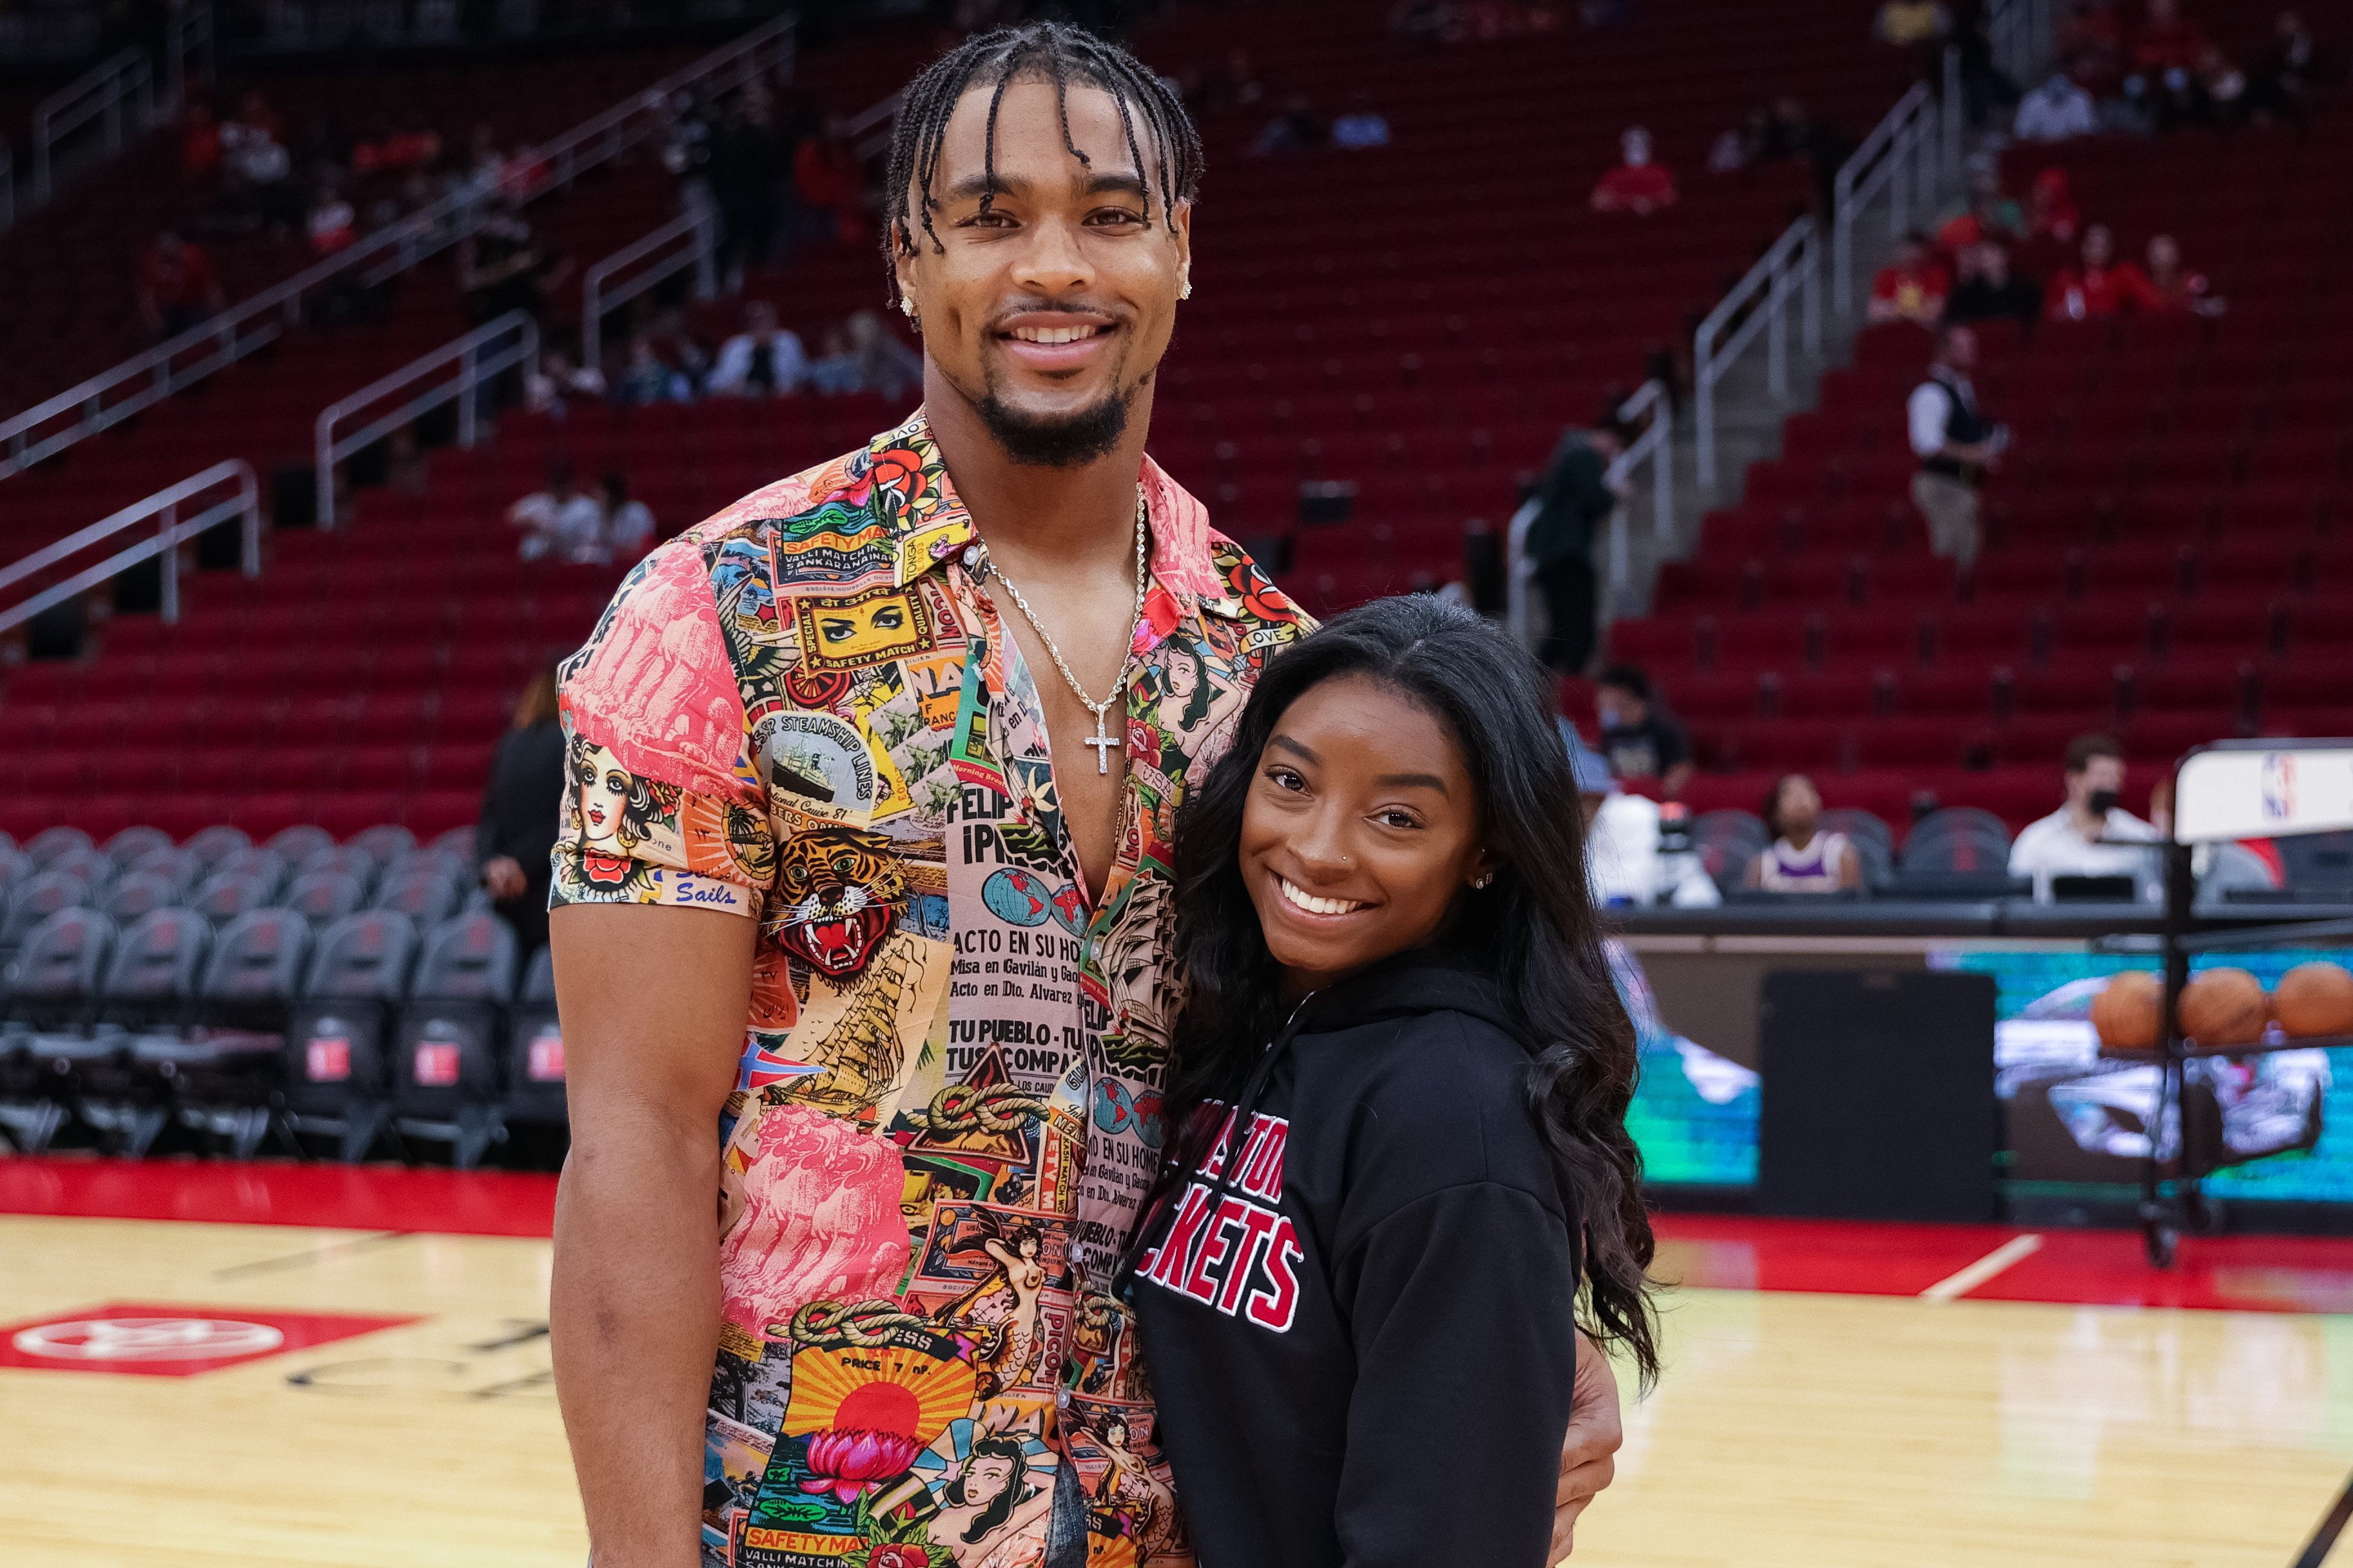 Simone Biles and Jonathan Owens posed for photo at a game between the Houston Rockets and the Los Angeles Lakers